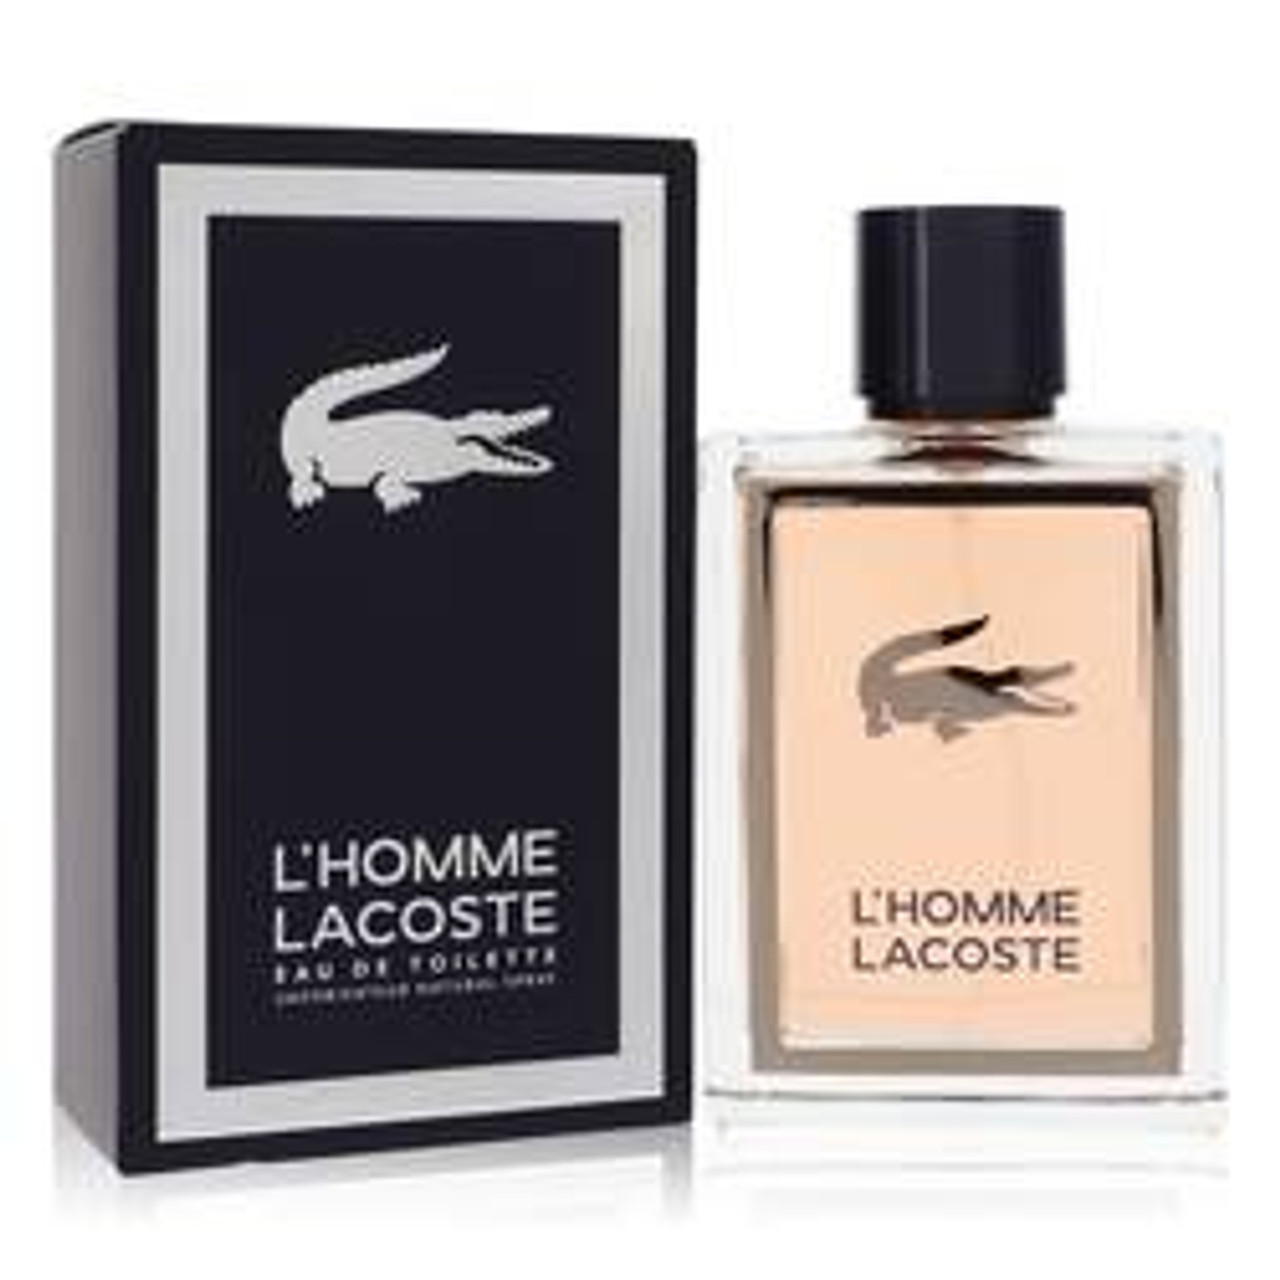 Lacoste L'homme Cologne By Lacoste Eau De Toilette Spray 3.3 oz for Men - [From 120.00 - Choose pk Qty ] - *Ships from Miami